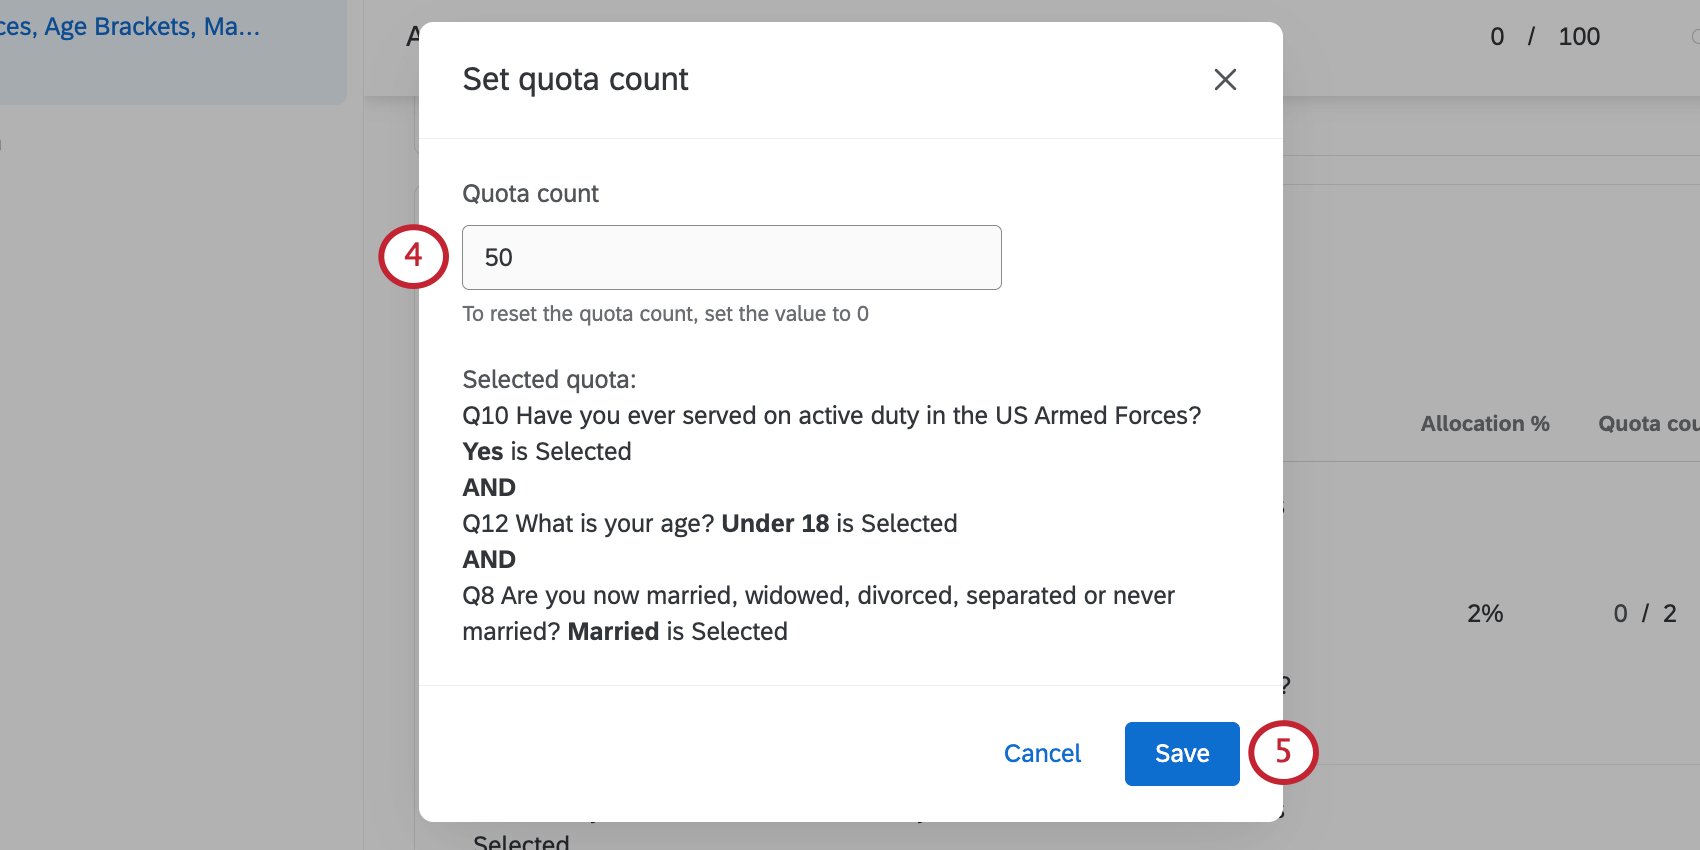 New window where you set a quota count